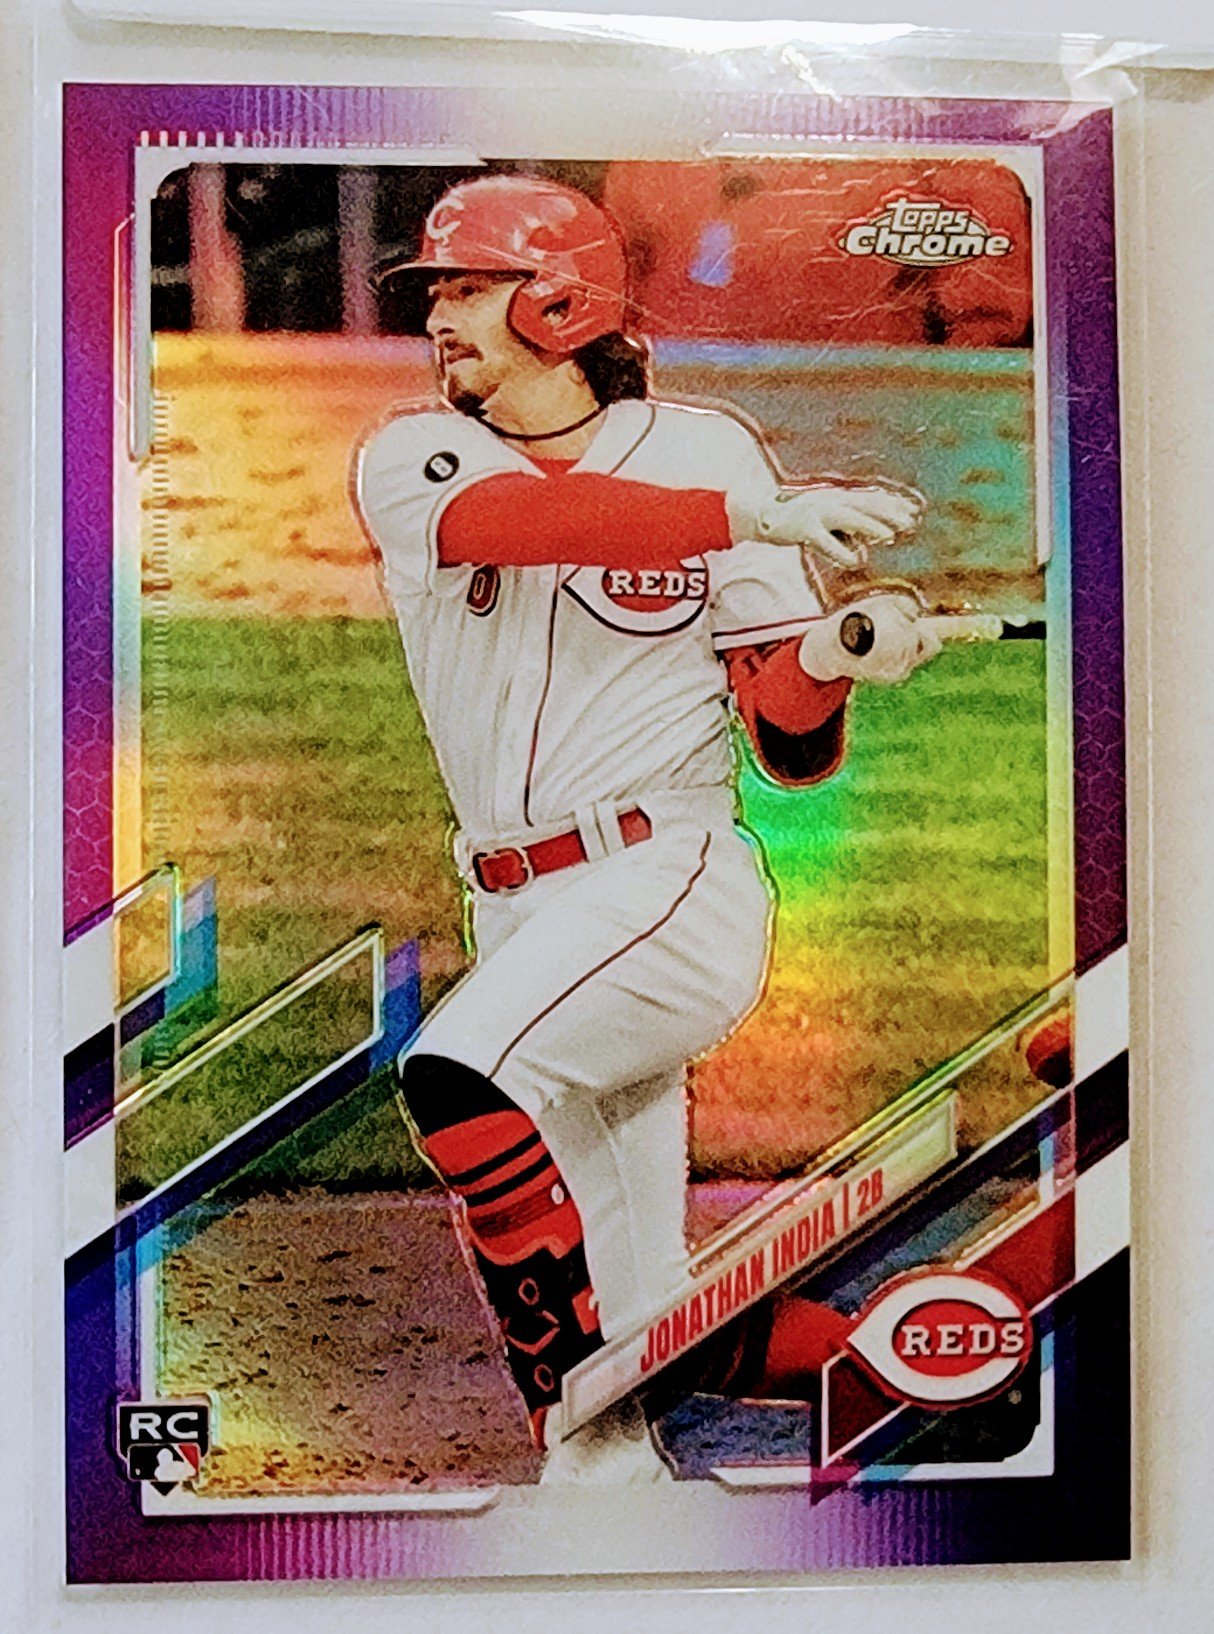 2021 Topps Chrome Update Jonathan India Purple Rookie Refractor Baseball Card AVM1 simple Xclusive Collectibles   